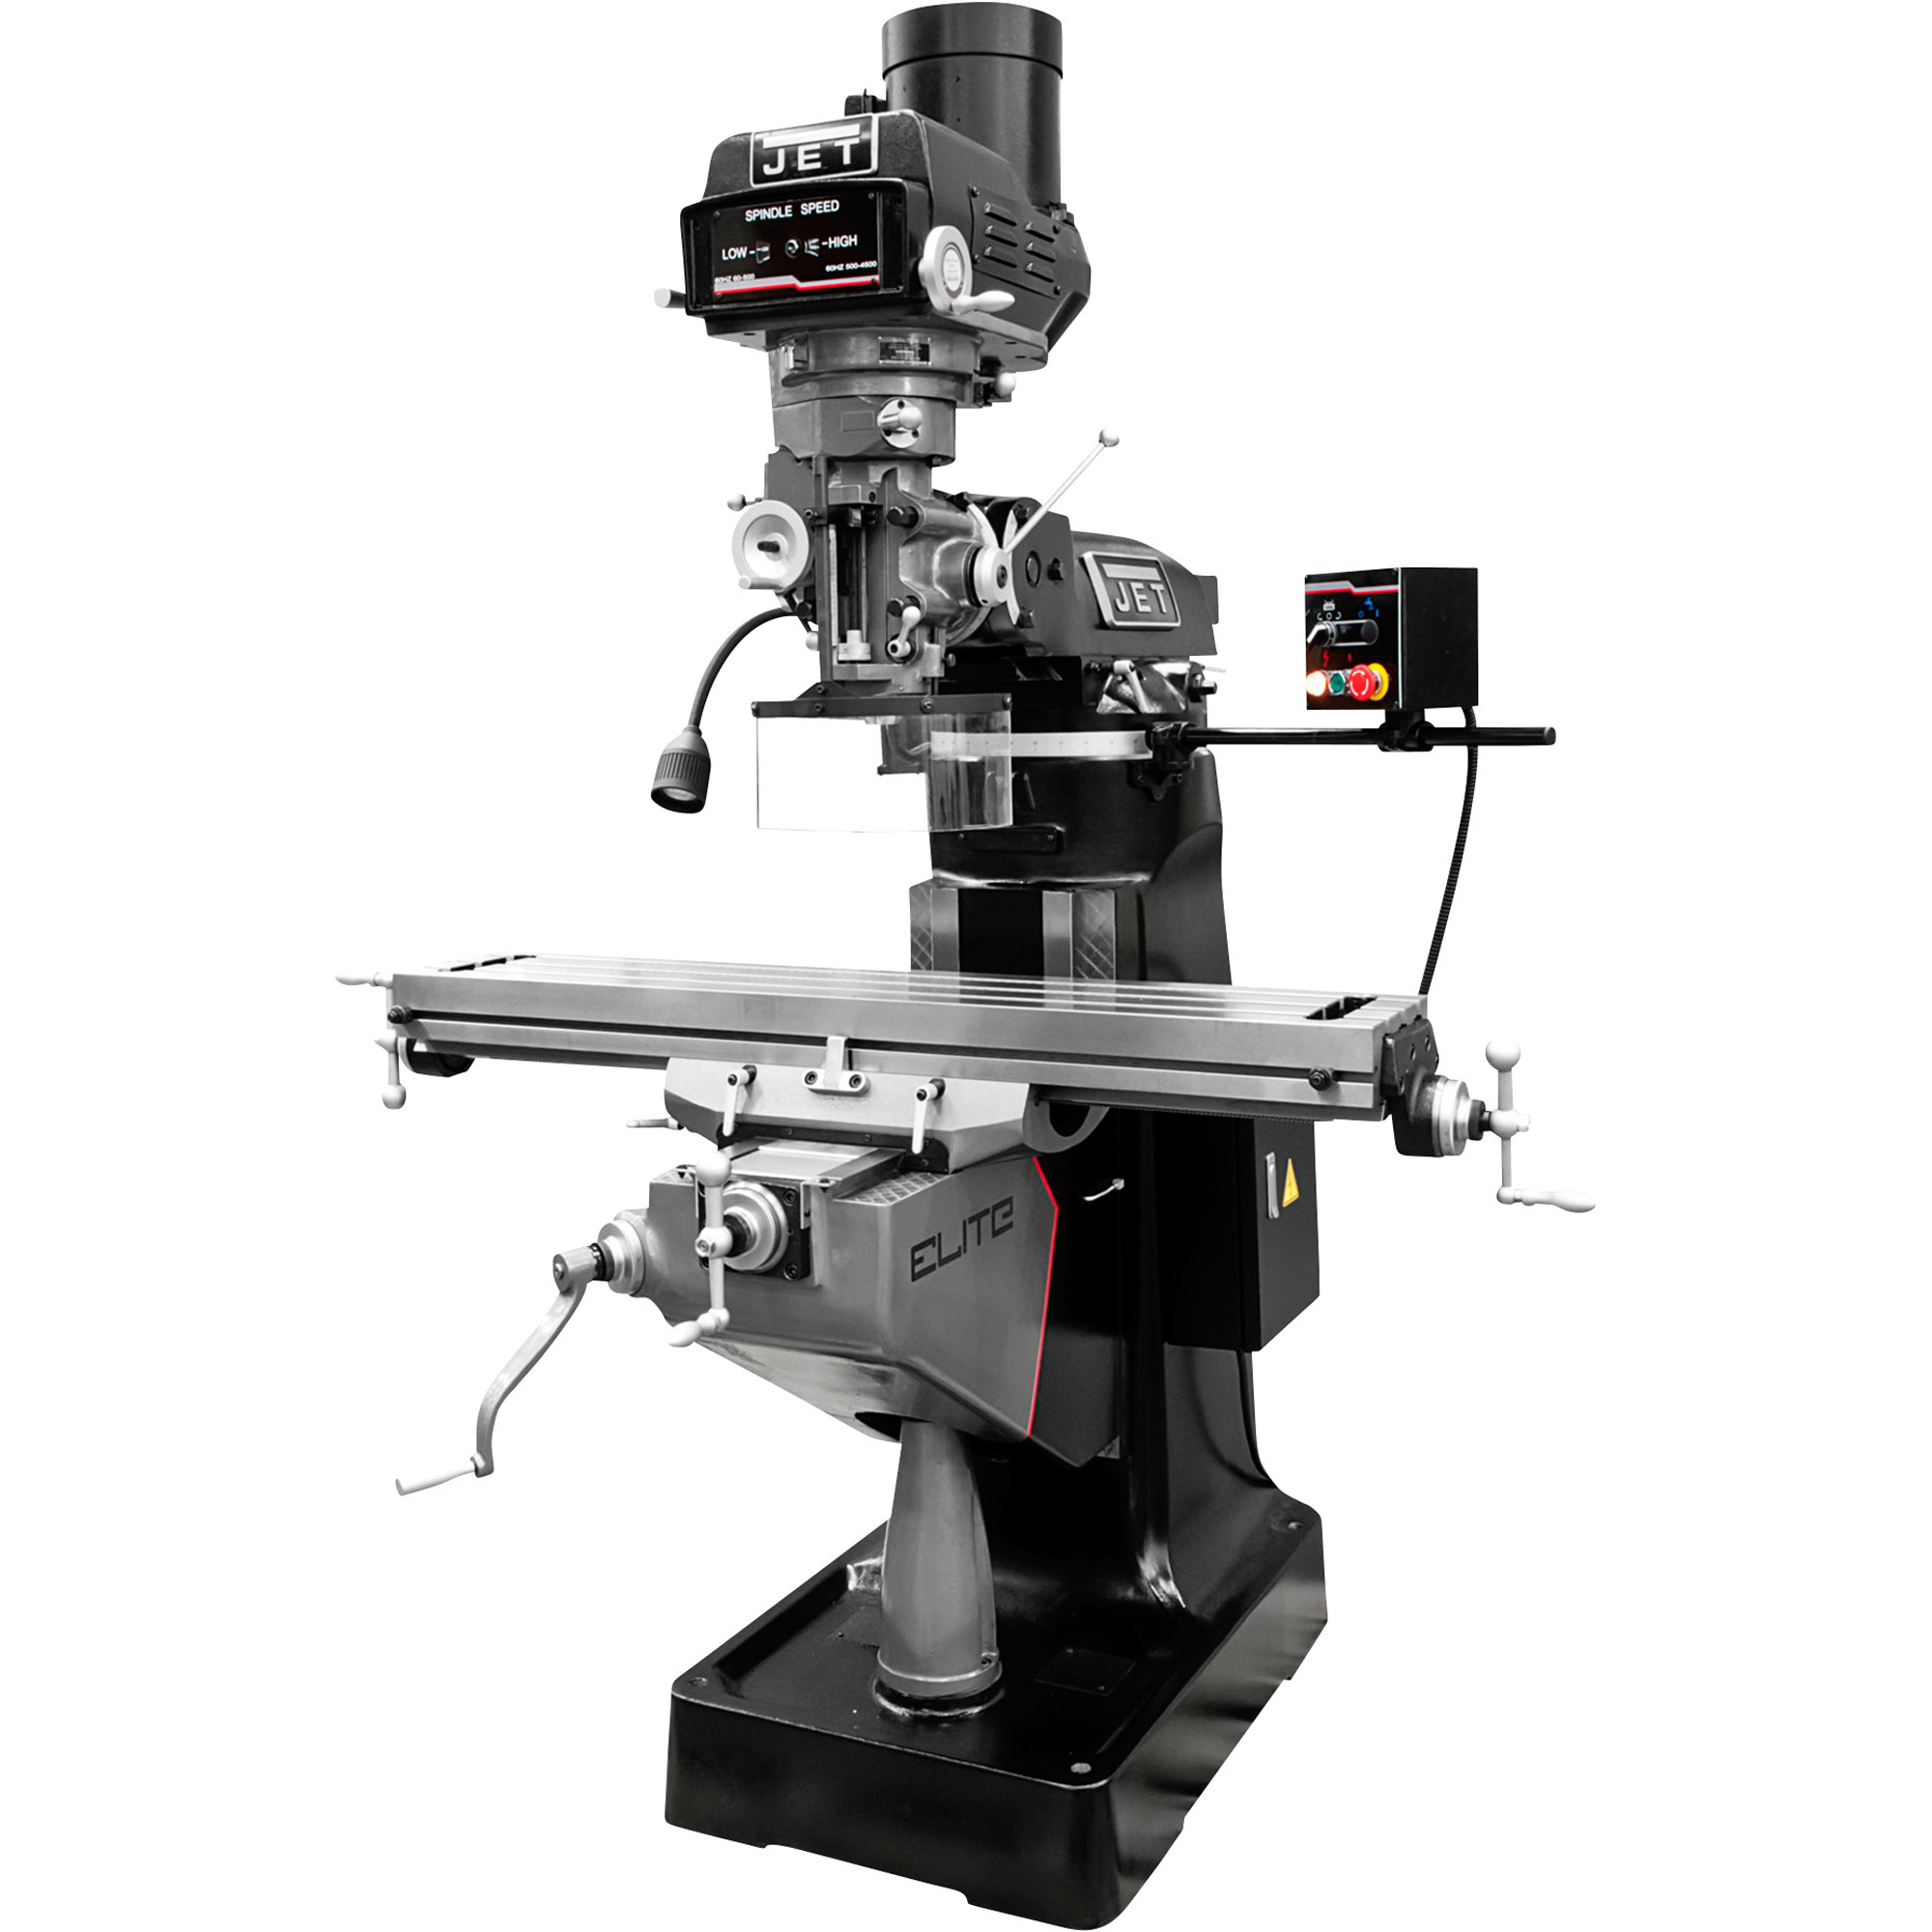 JET Elite Mill with 2-Axis ACU-RITE 203 DRO, Servo X, Y, Z-Axis Powerfeeds and Air Powered Draw Bar, 9Inch x 49Inch Table, 3 HP, Model ETM-949 -  894186